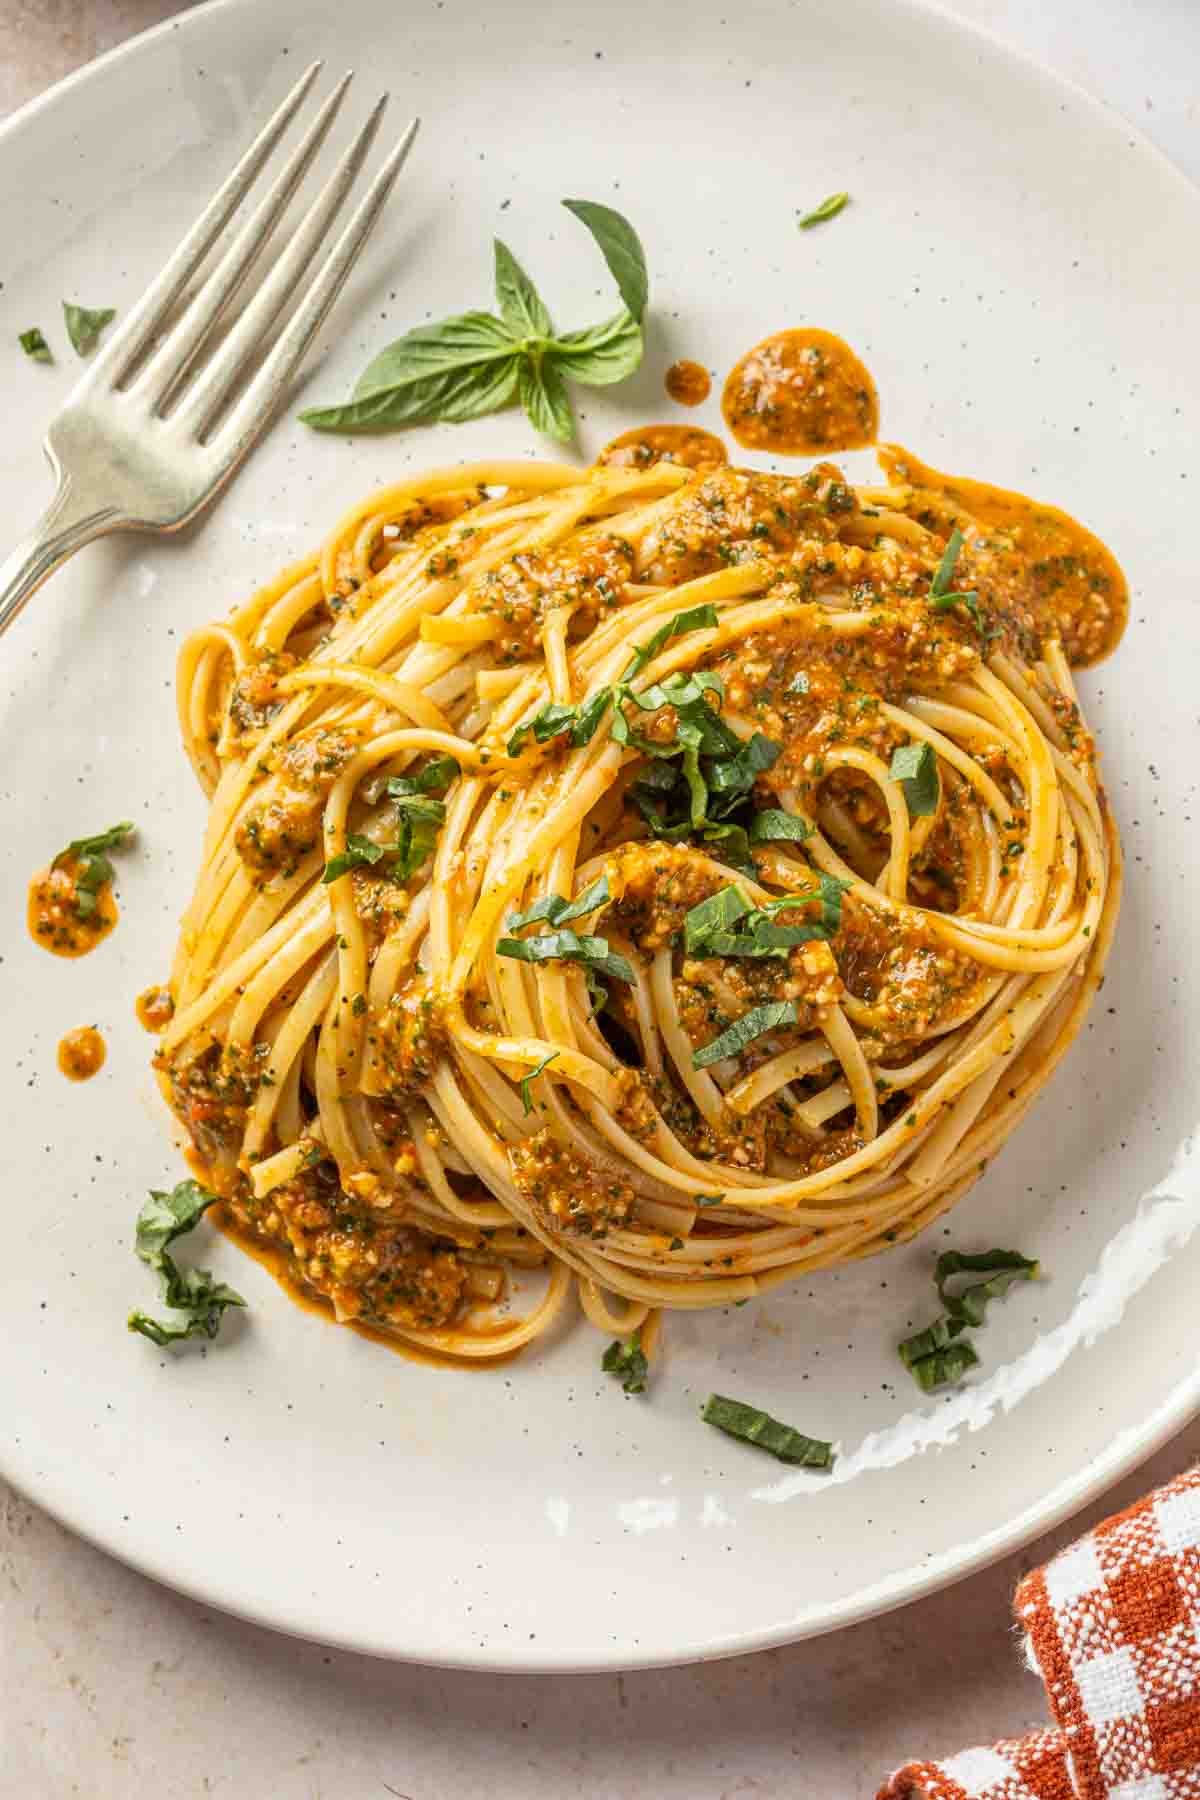 A plate of linguine in a red pepper pesto sauce, garnished with fresh sliced basil leaves. 